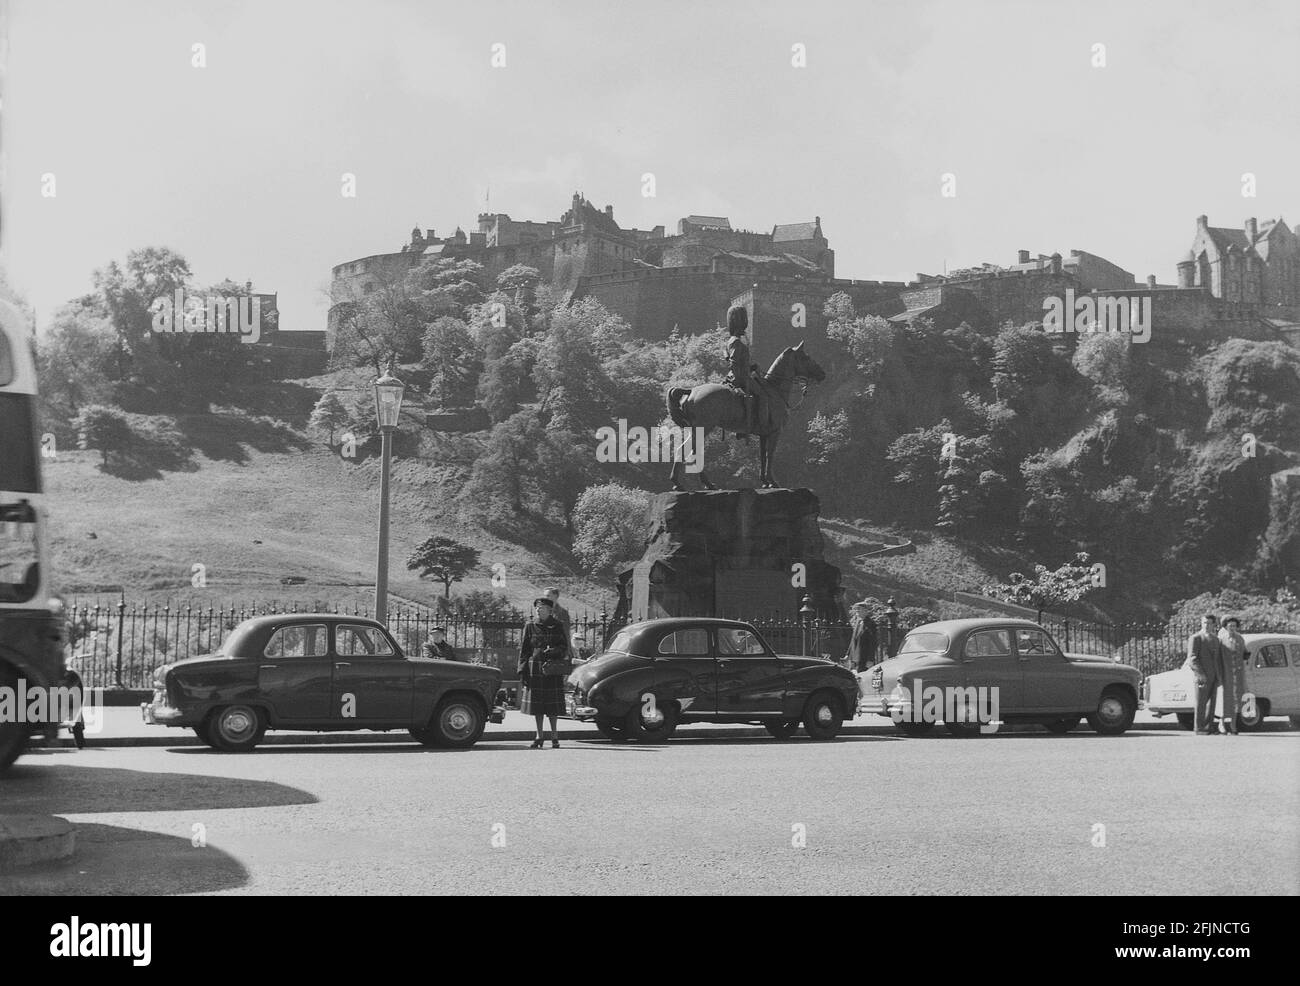 1956, historical, Scotland, Edinburgh, a view of Princes Street, with motor cars of the era parked by the Royal Grey's memorial statue, with the famous castle in the background. Unveiled in 1906, the statue commemorates the Royal Scot Greys who left the city to fight in South Africa in the Boer War, 1899 and in other previous military campiagns. Edinburgh Castle is the Regimental HQ of the Royal Scots Dragoon Guards. Stock Photo